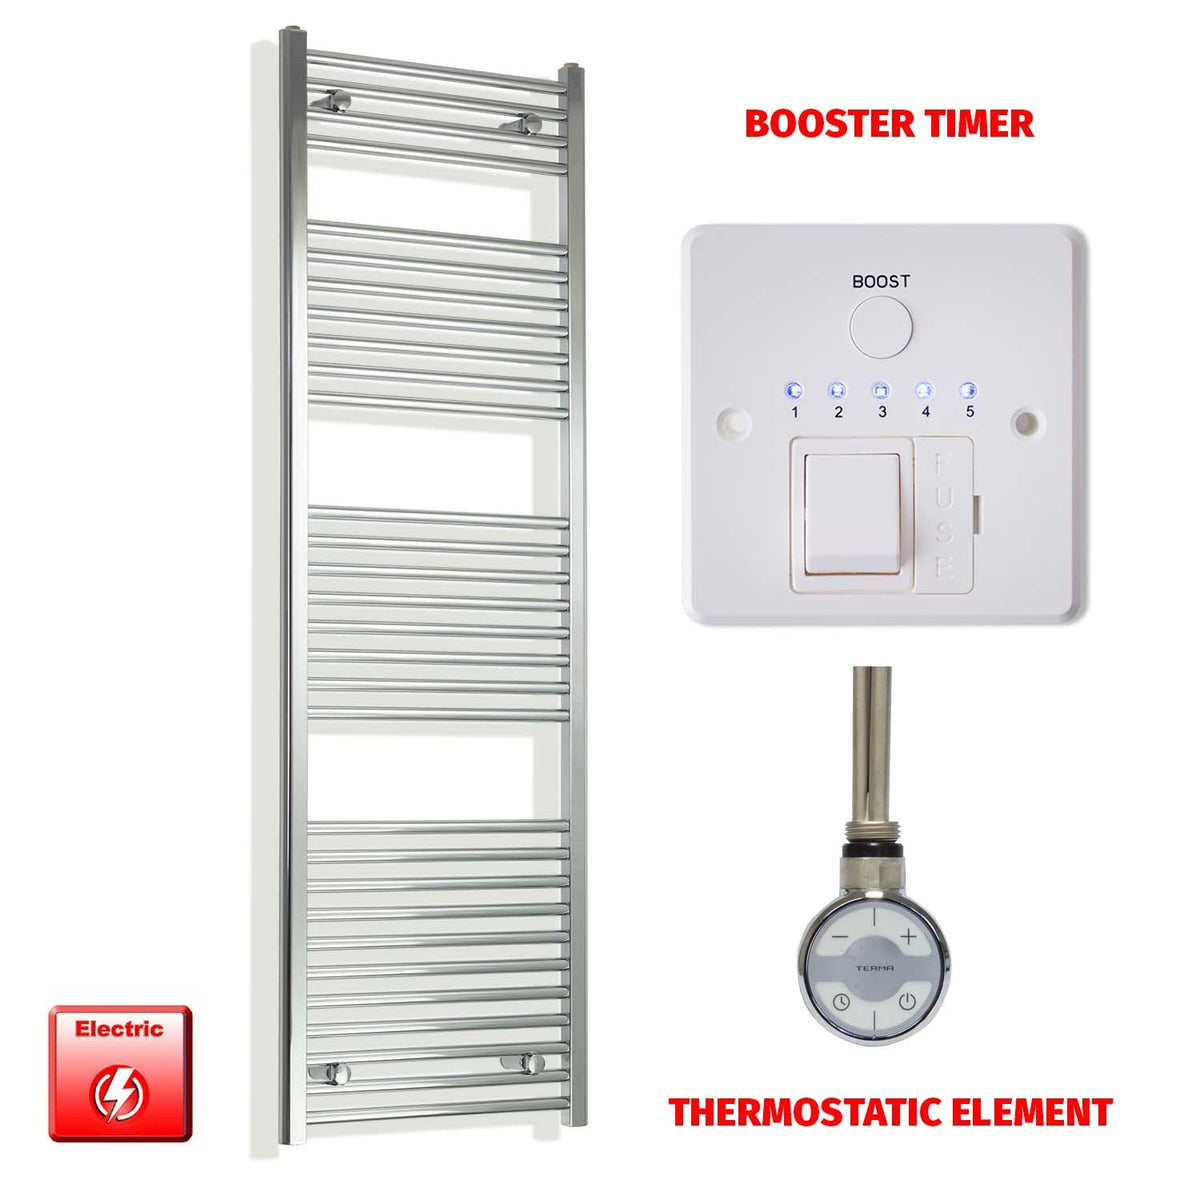 1700mm High 550mm Wide Pre-Filled Electric Heated Towel Radiator Chrome HTR MOA Element Booster Timer